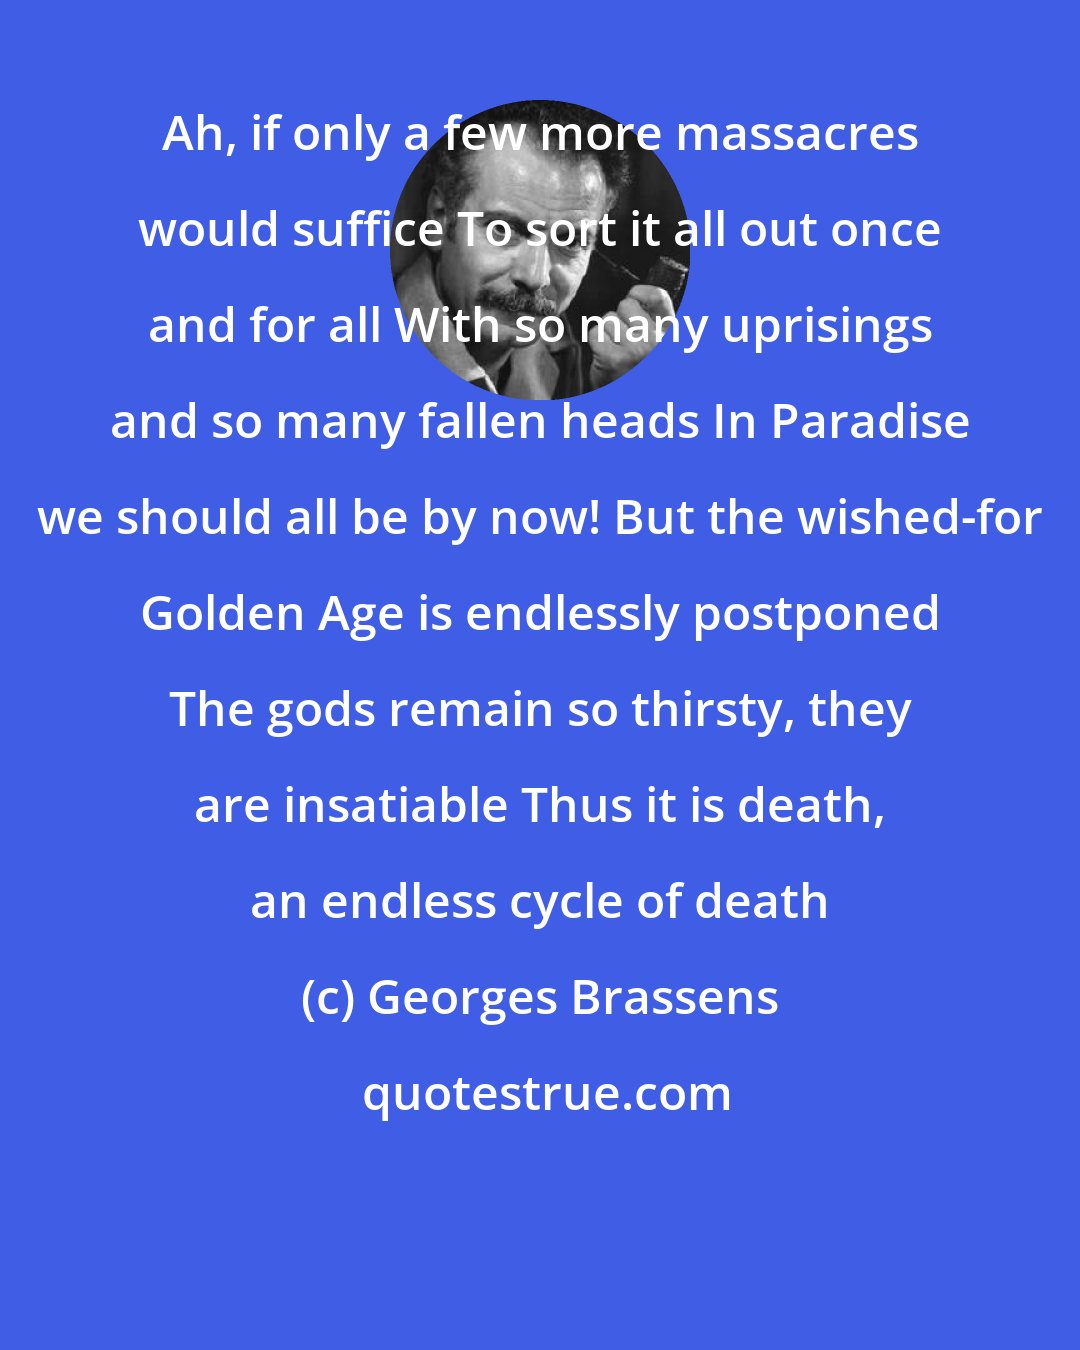 Georges Brassens: Ah, if only a few more massacres would suffice To sort it all out once and for all With so many uprisings and so many fallen heads In Paradise we should all be by now! But the wished-for Golden Age is endlessly postponed The gods remain so thirsty, they are insatiable Thus it is death, an endless cycle of death